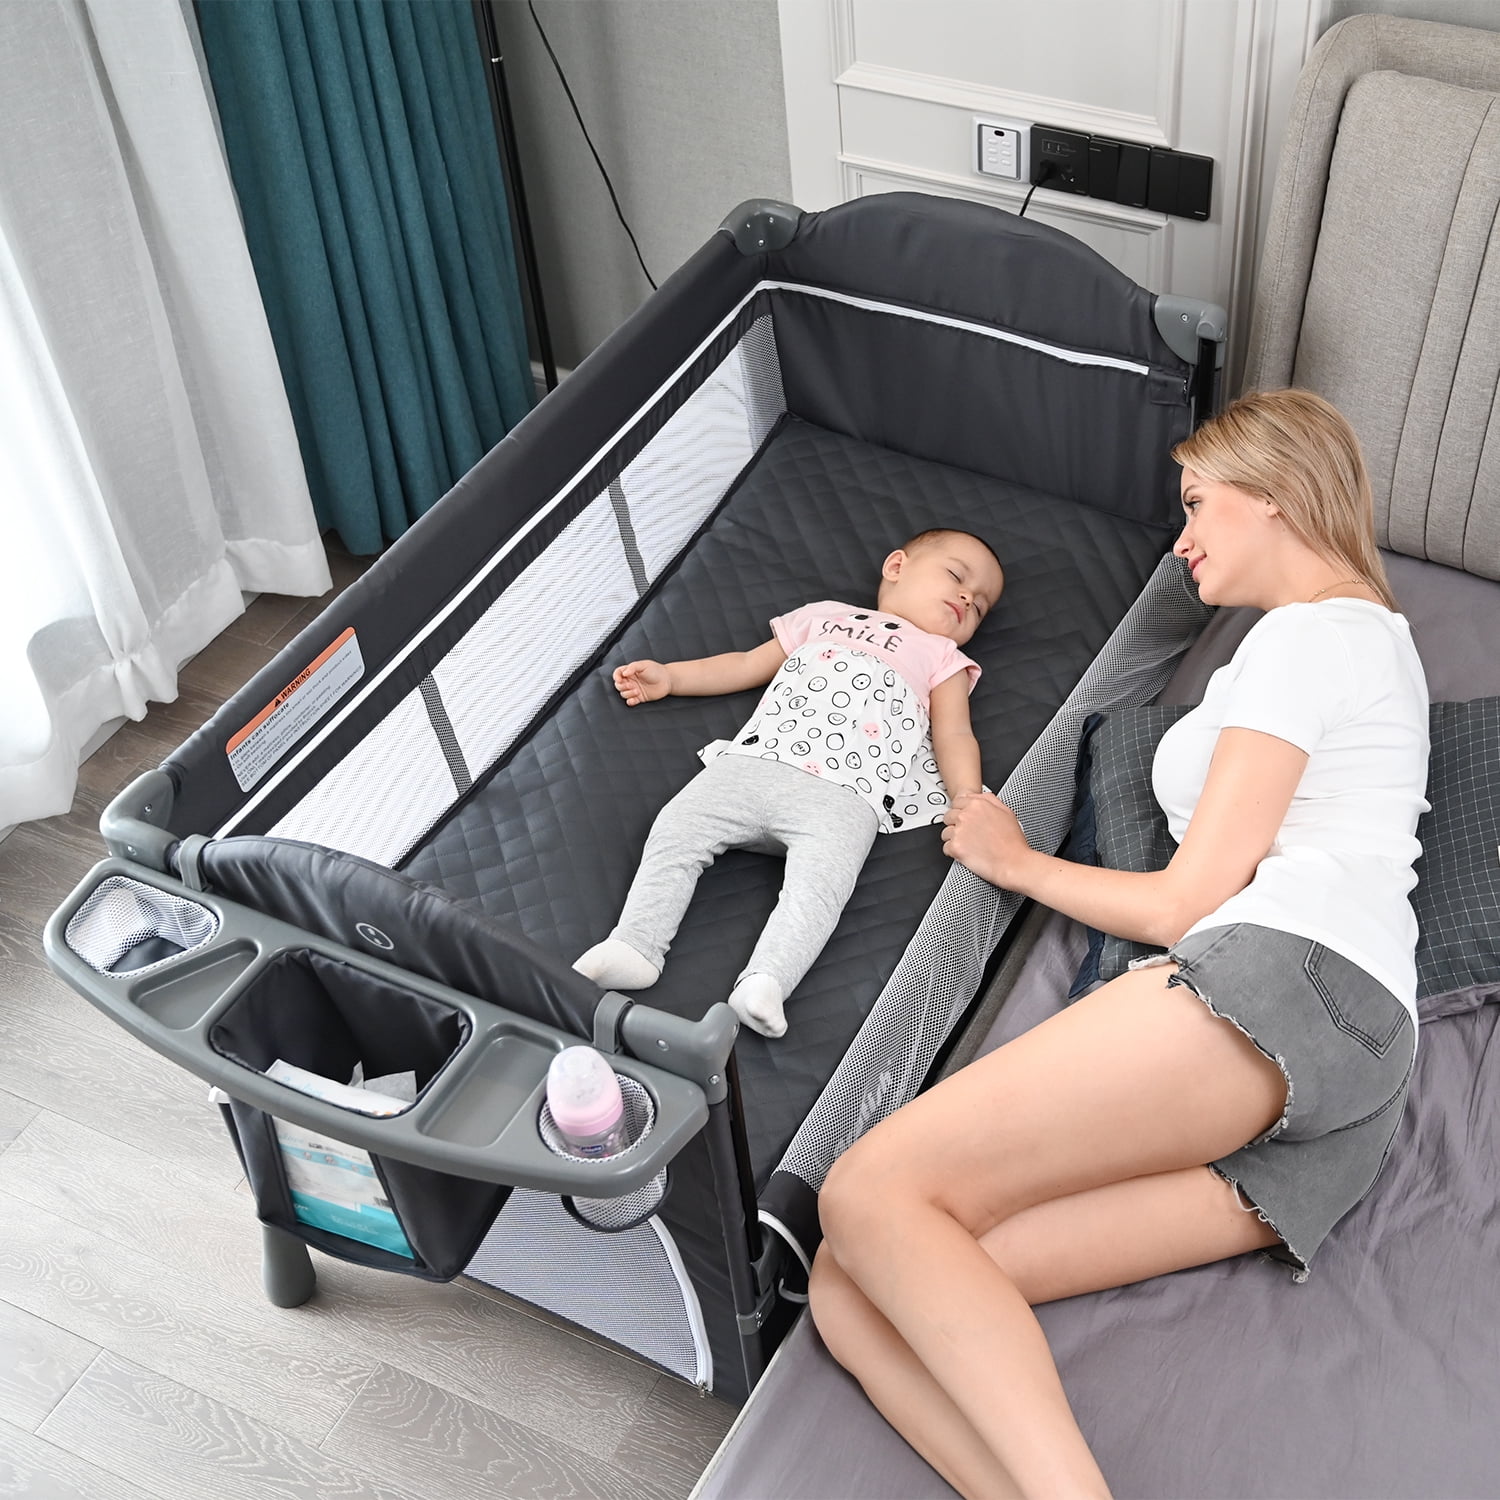 5 in 1 Baby Bassinet Bedside Sleeper Bedside Crib, Includes Mattress, Diaper Changer, Hanging Toys, Portable Travel Crib for Girl Boy Infant Newborn,Gray